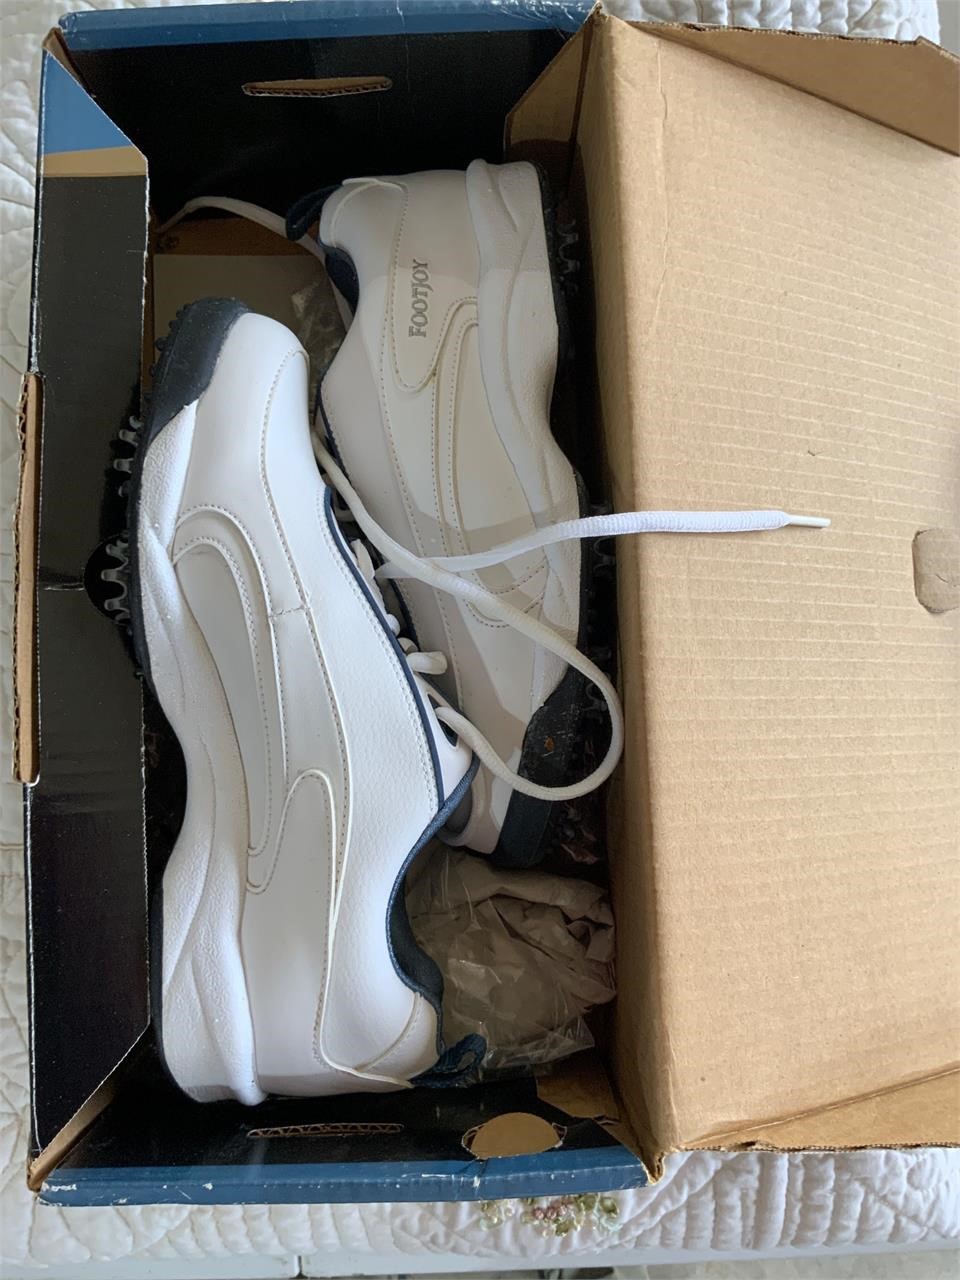 Ladies Footjoy Golf Shoes New in Box